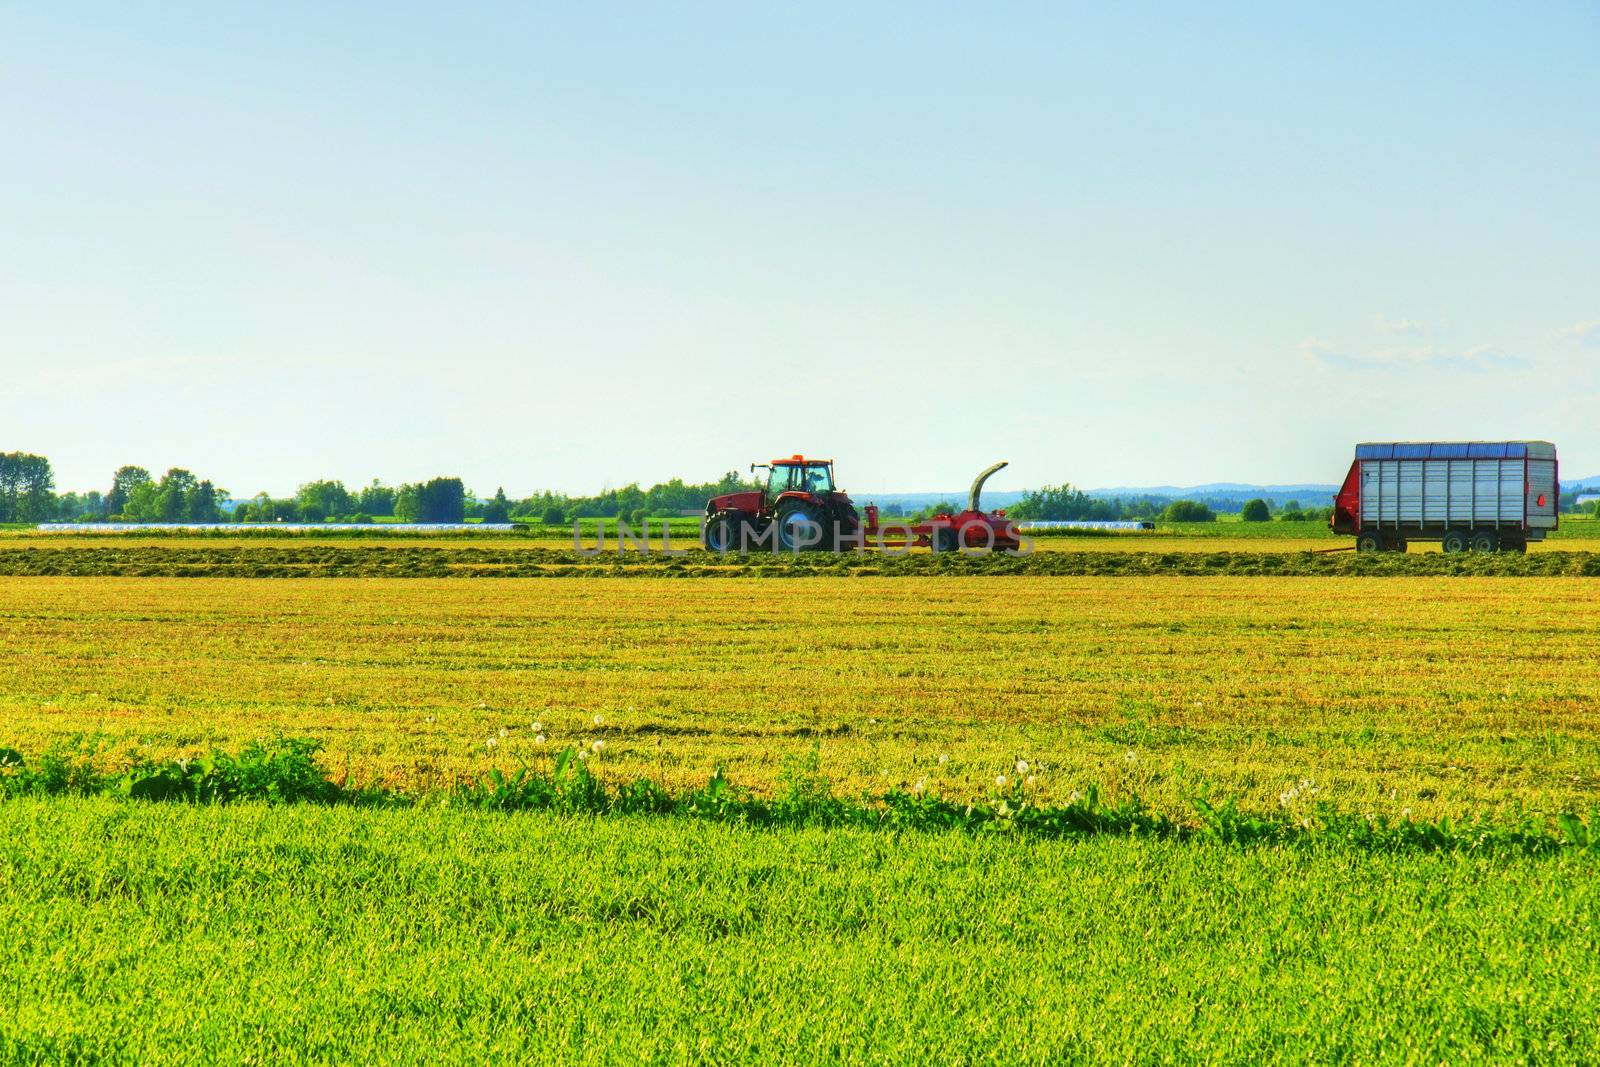 Beautiful HDR rendering of rural landscape with early farm work in the cereal field with tractor and other equipment.